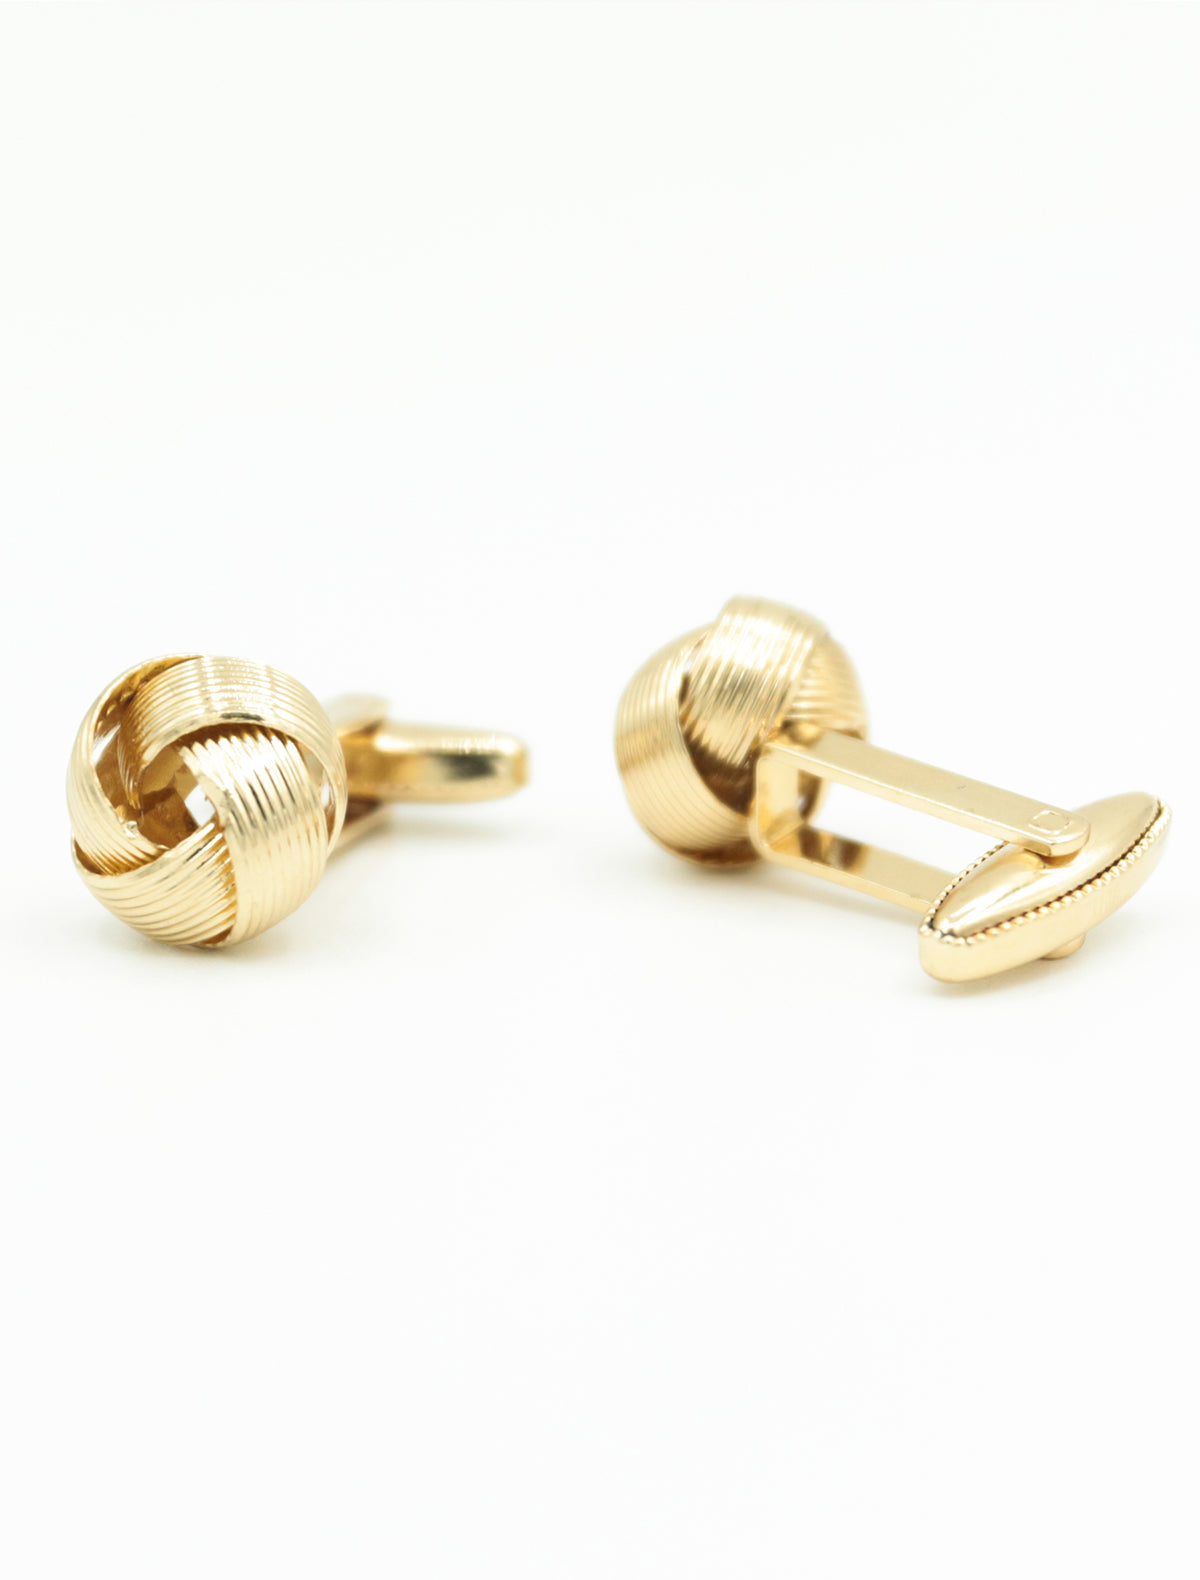 GOLD KNOTTED STYLE CUFFLINKS